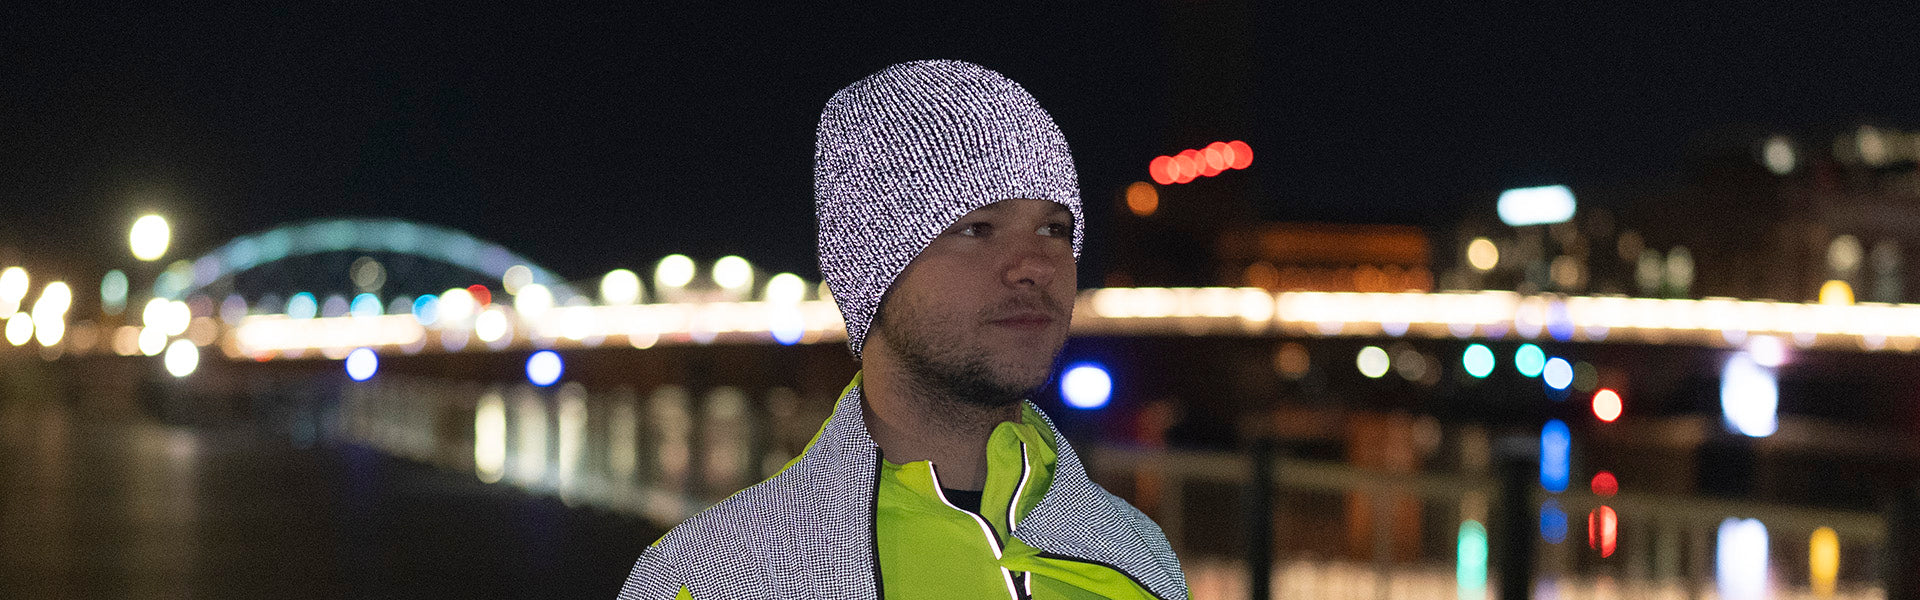 A man at night with a river and city skyline in the background. He is wearing a reflective beanie and a reflective softshell running jacket.